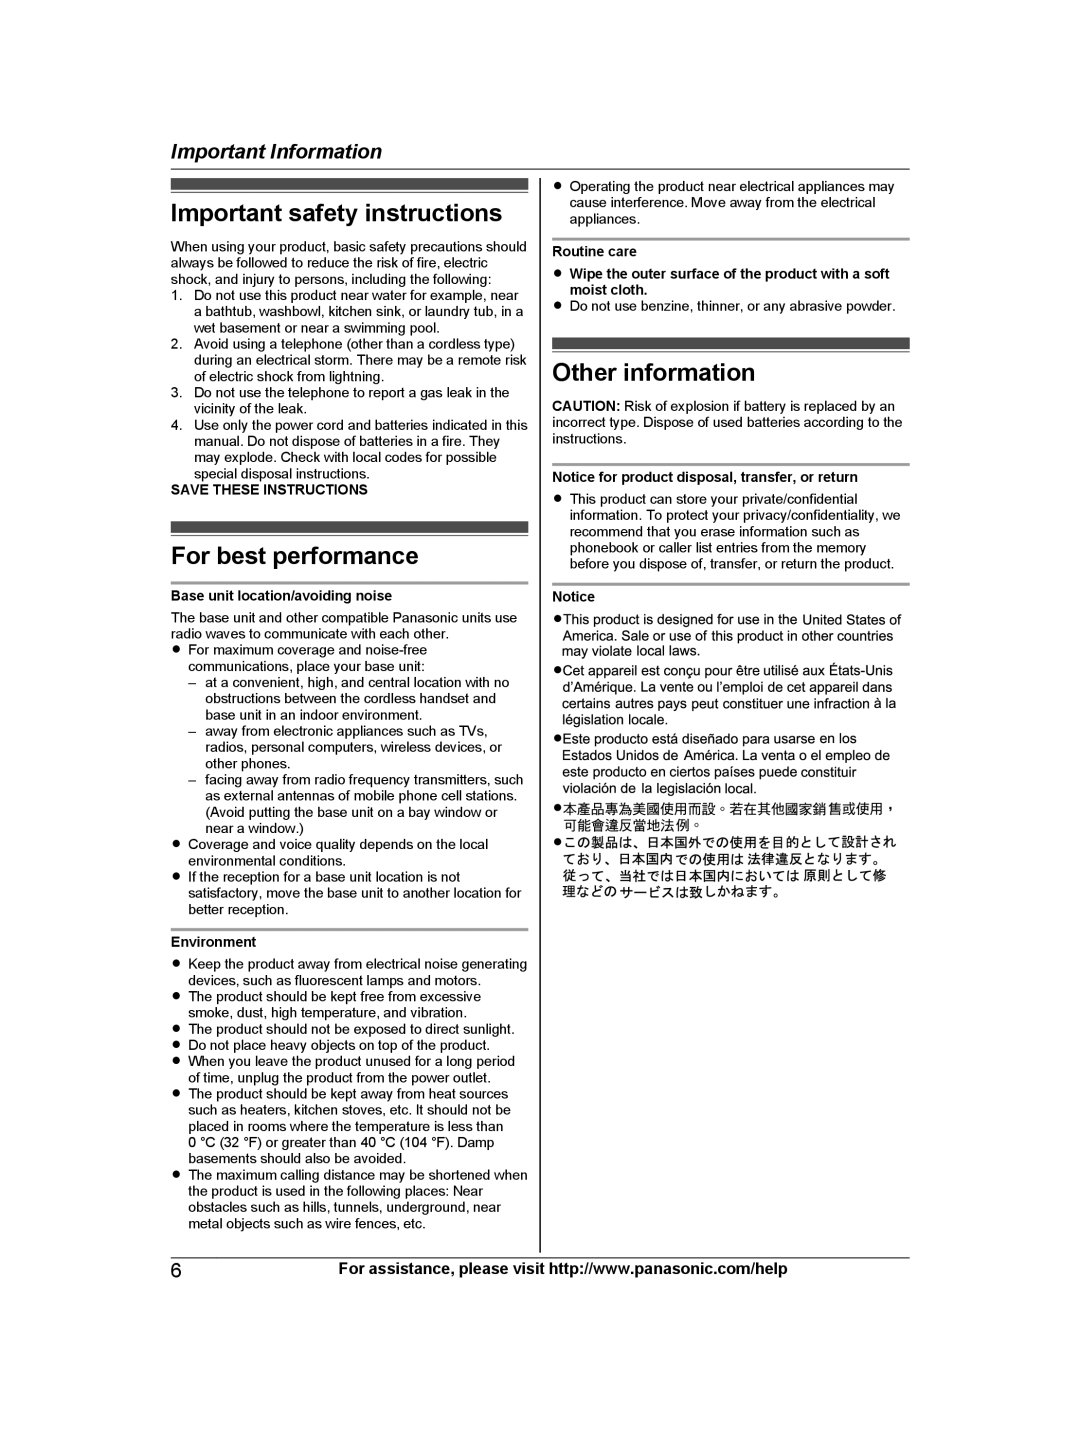 Panasonic KX-TG6672 Important safety instructions, For best performance, Other information, Important Information 